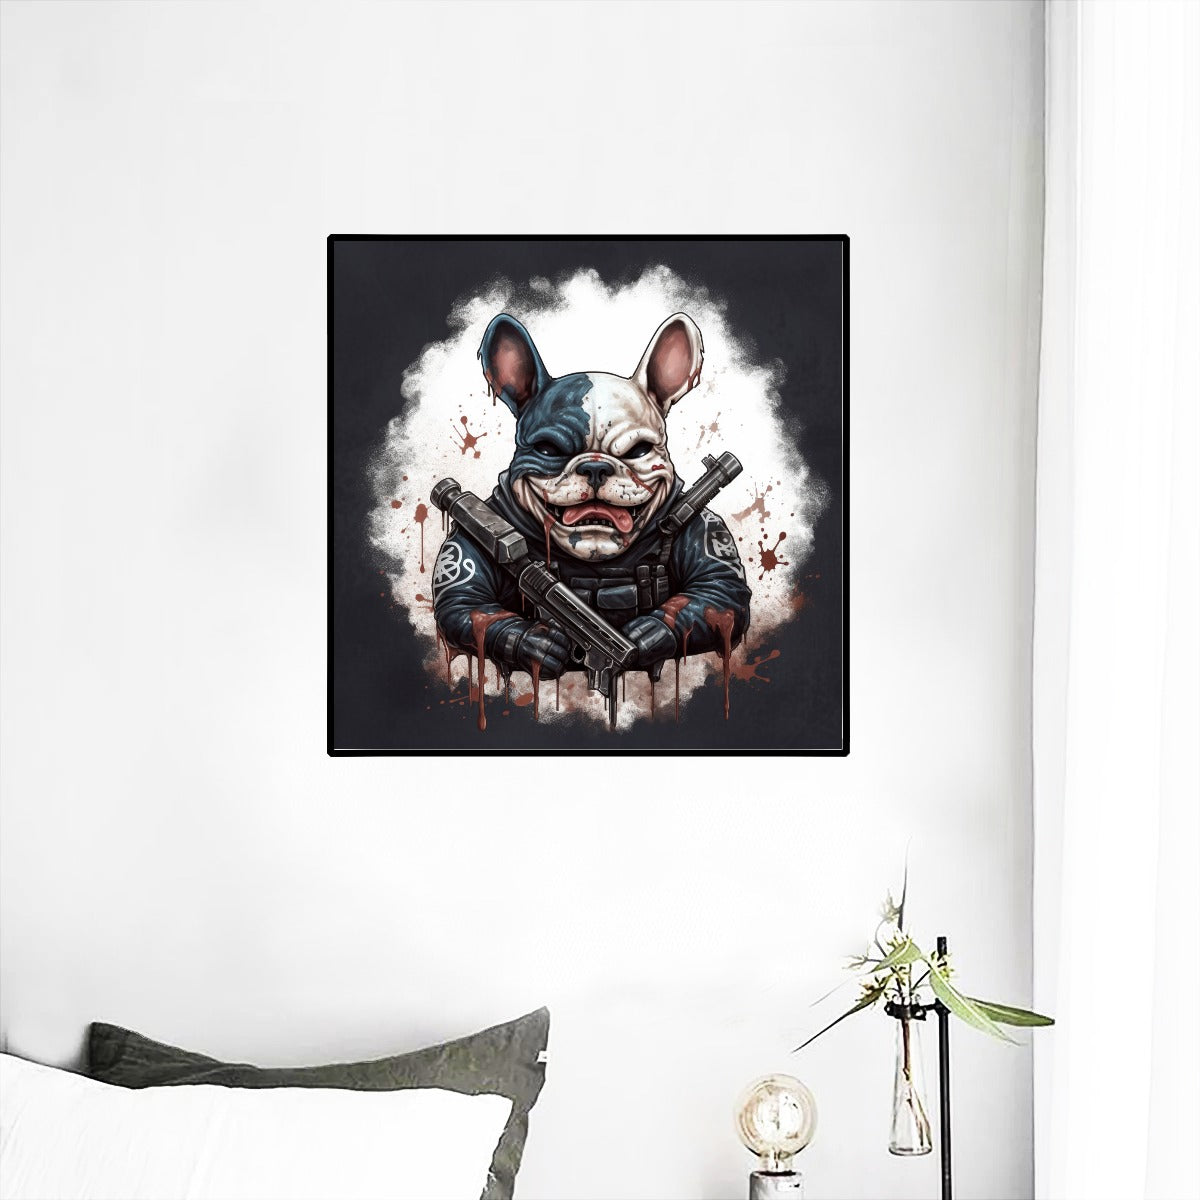 Mesmerizing Frenchie-Inspired Wall Mural